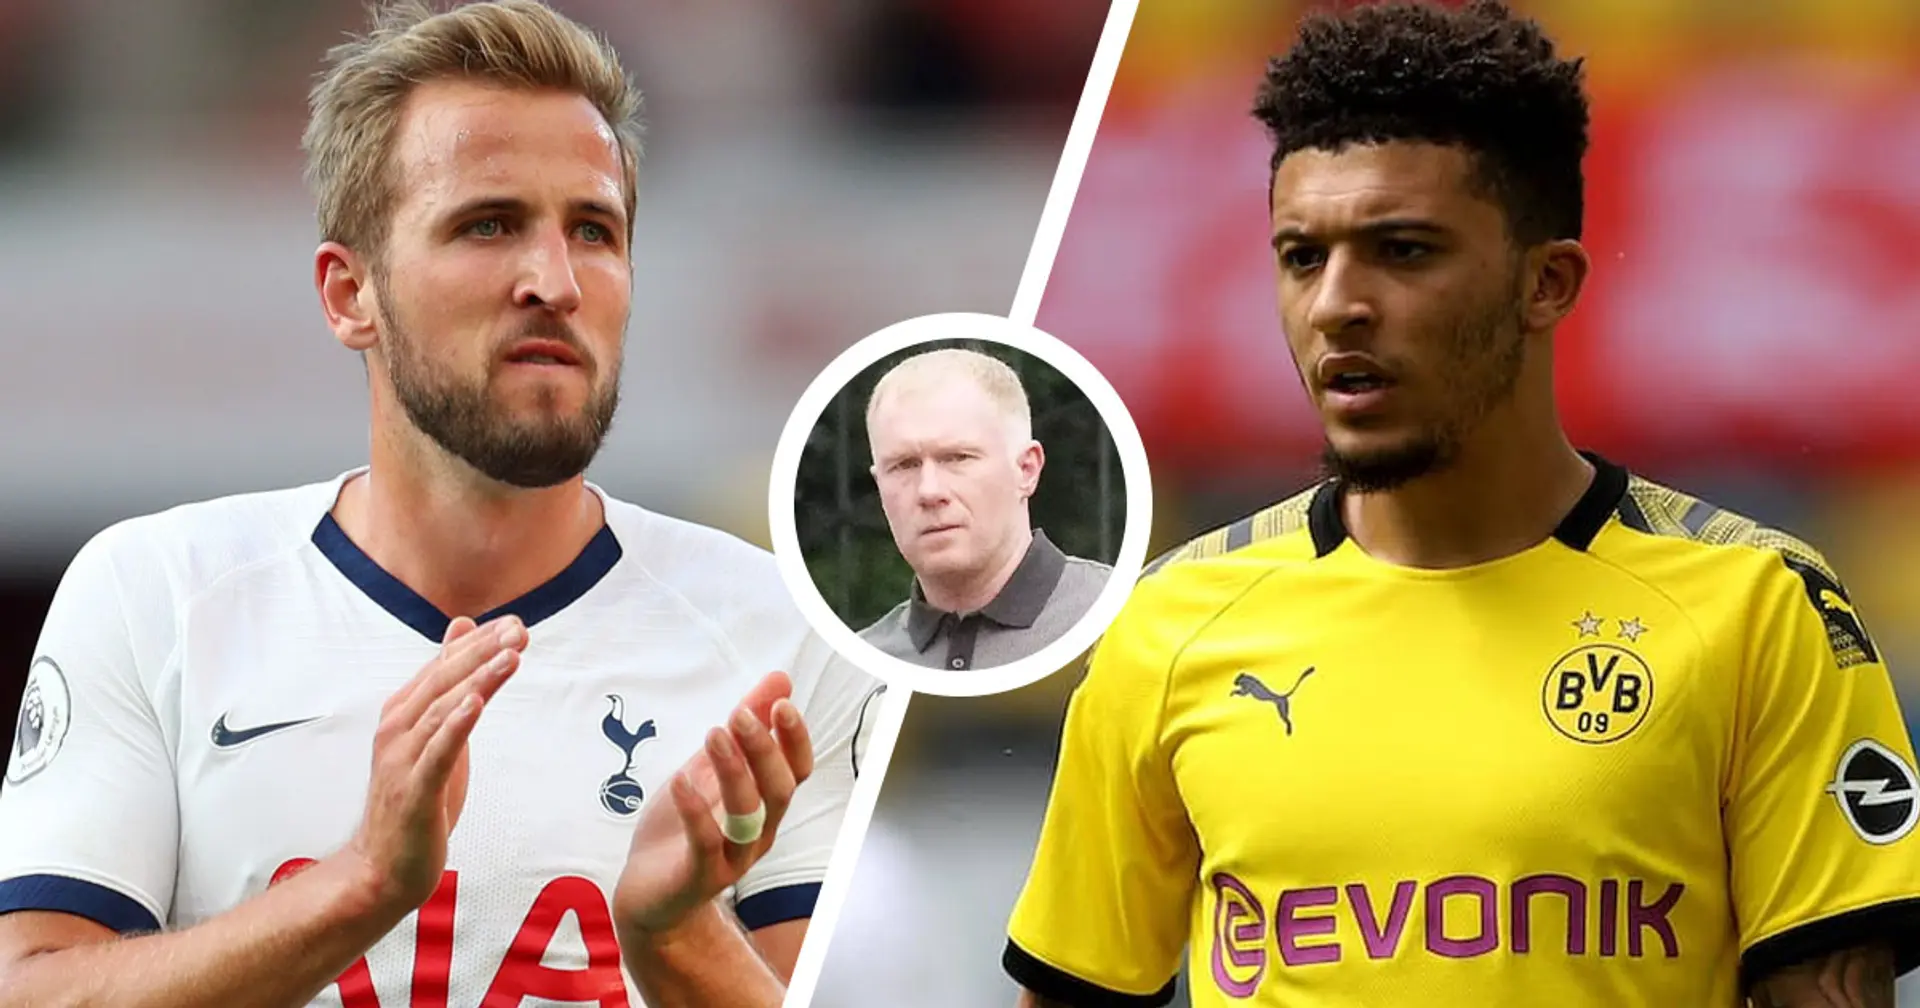 Paul Scholes urges United to prioritize Harry Kane’s signing ahead of Sancho deal